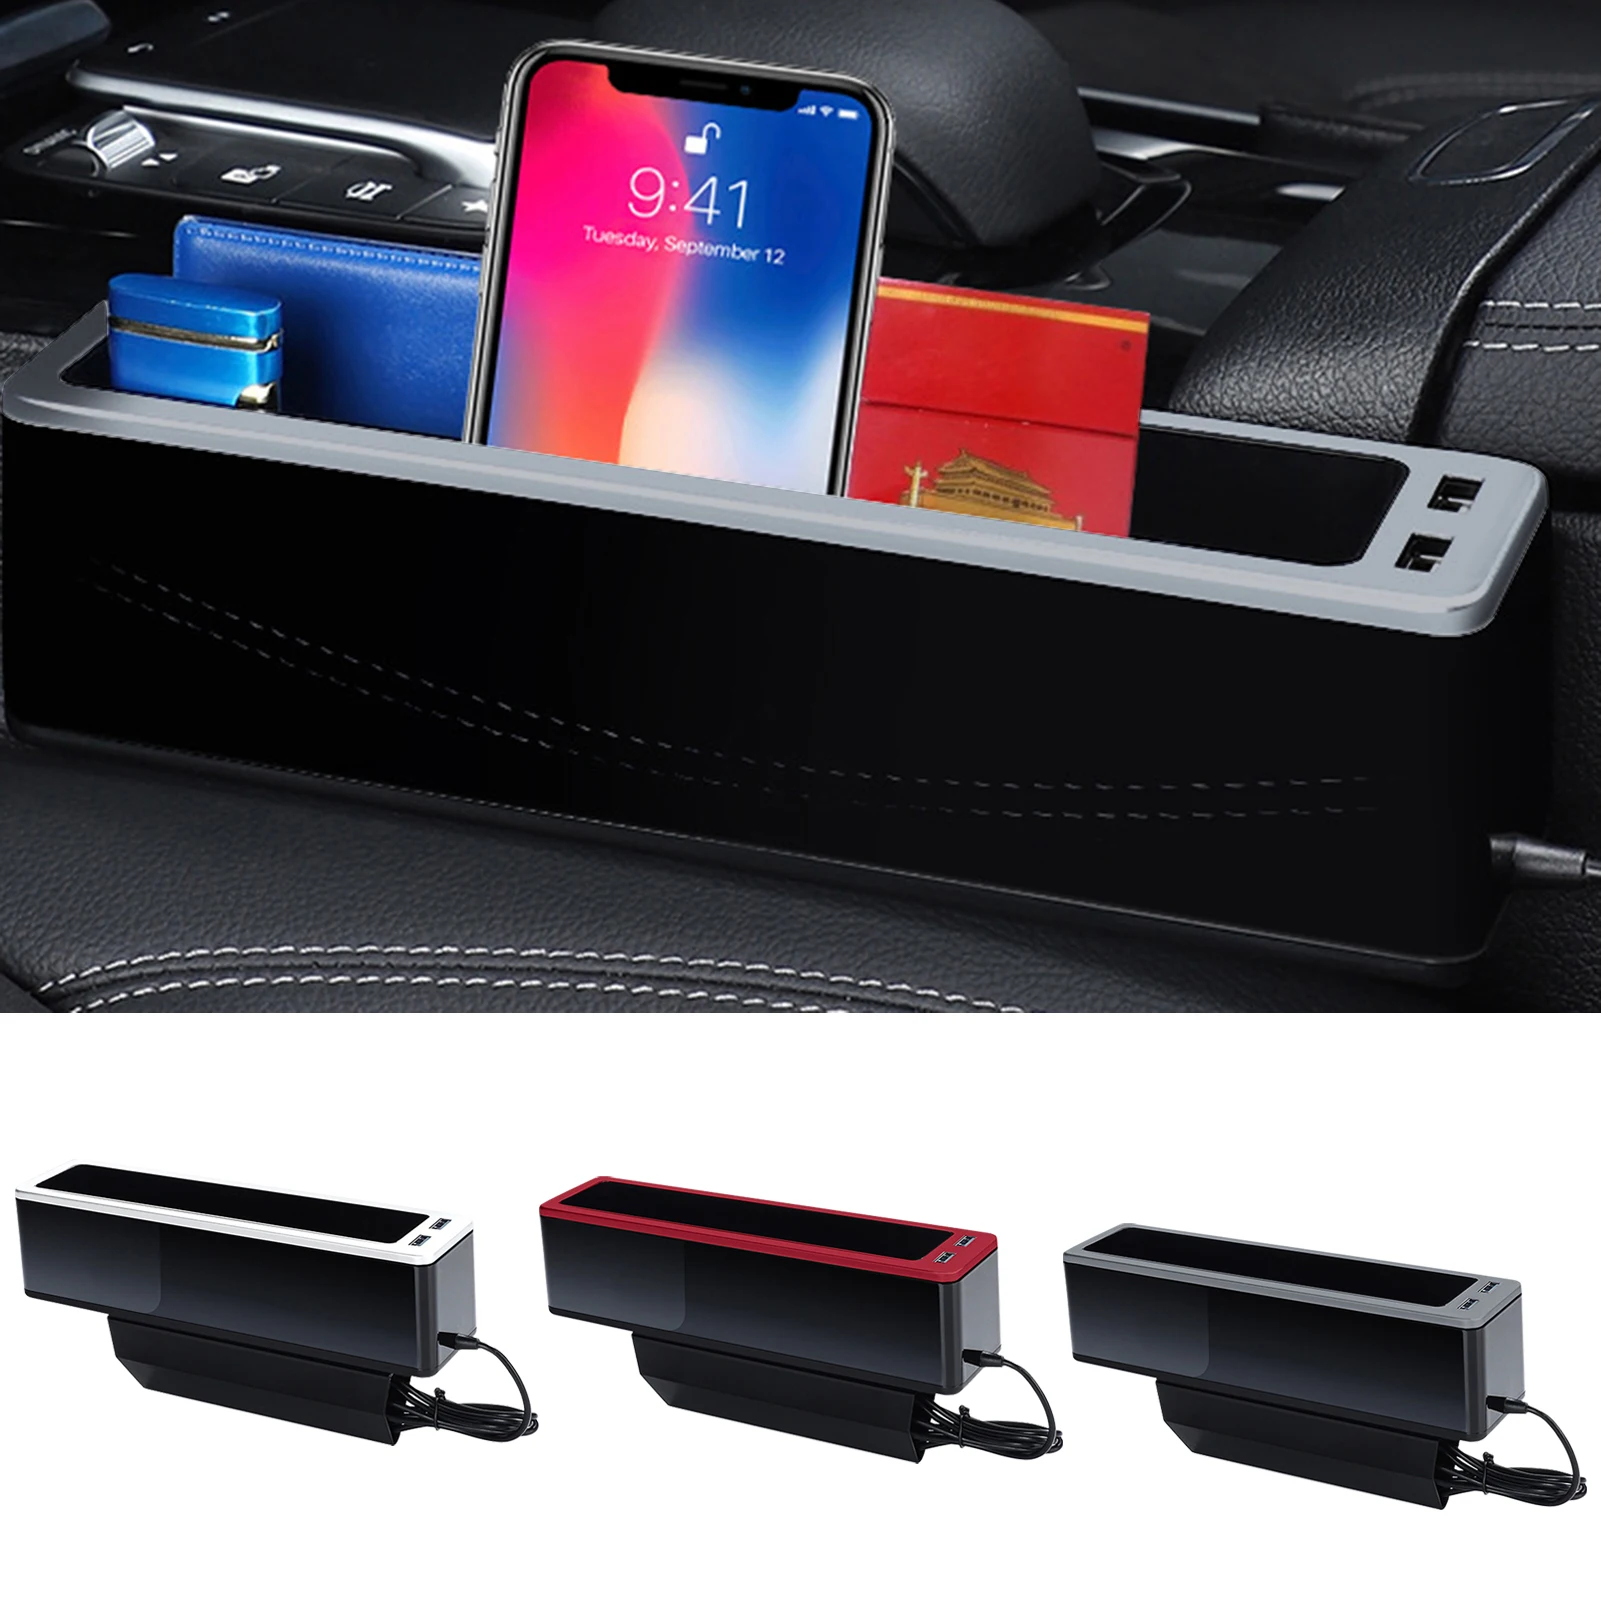 

Car Seats Gap Filler Organizer Console Side Pocket Storage Box Multifunctional Holder Seats Catcher Caddy with Double USB Ports